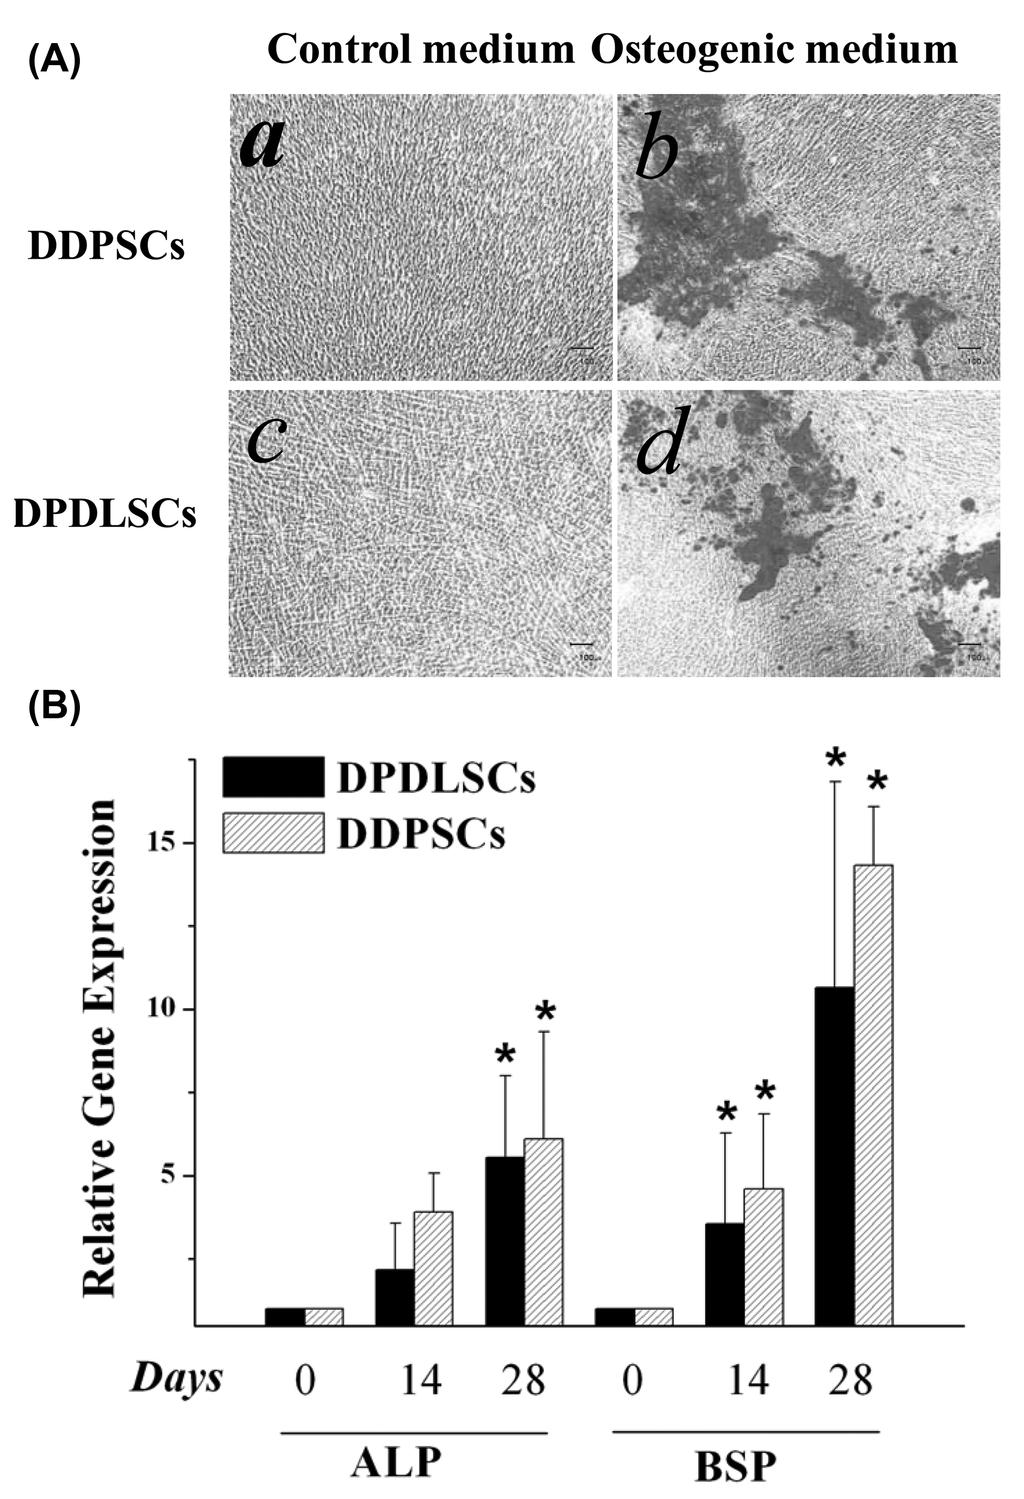 (B) Changes in the expressions of peroxisome proliferatoractivated receptor γ2 (PPARγ2) and lipoprotein lipase (LPL) after adipogenic differentiation. * p < 0.05, Wilcoxon signed rank test. Figure 6.